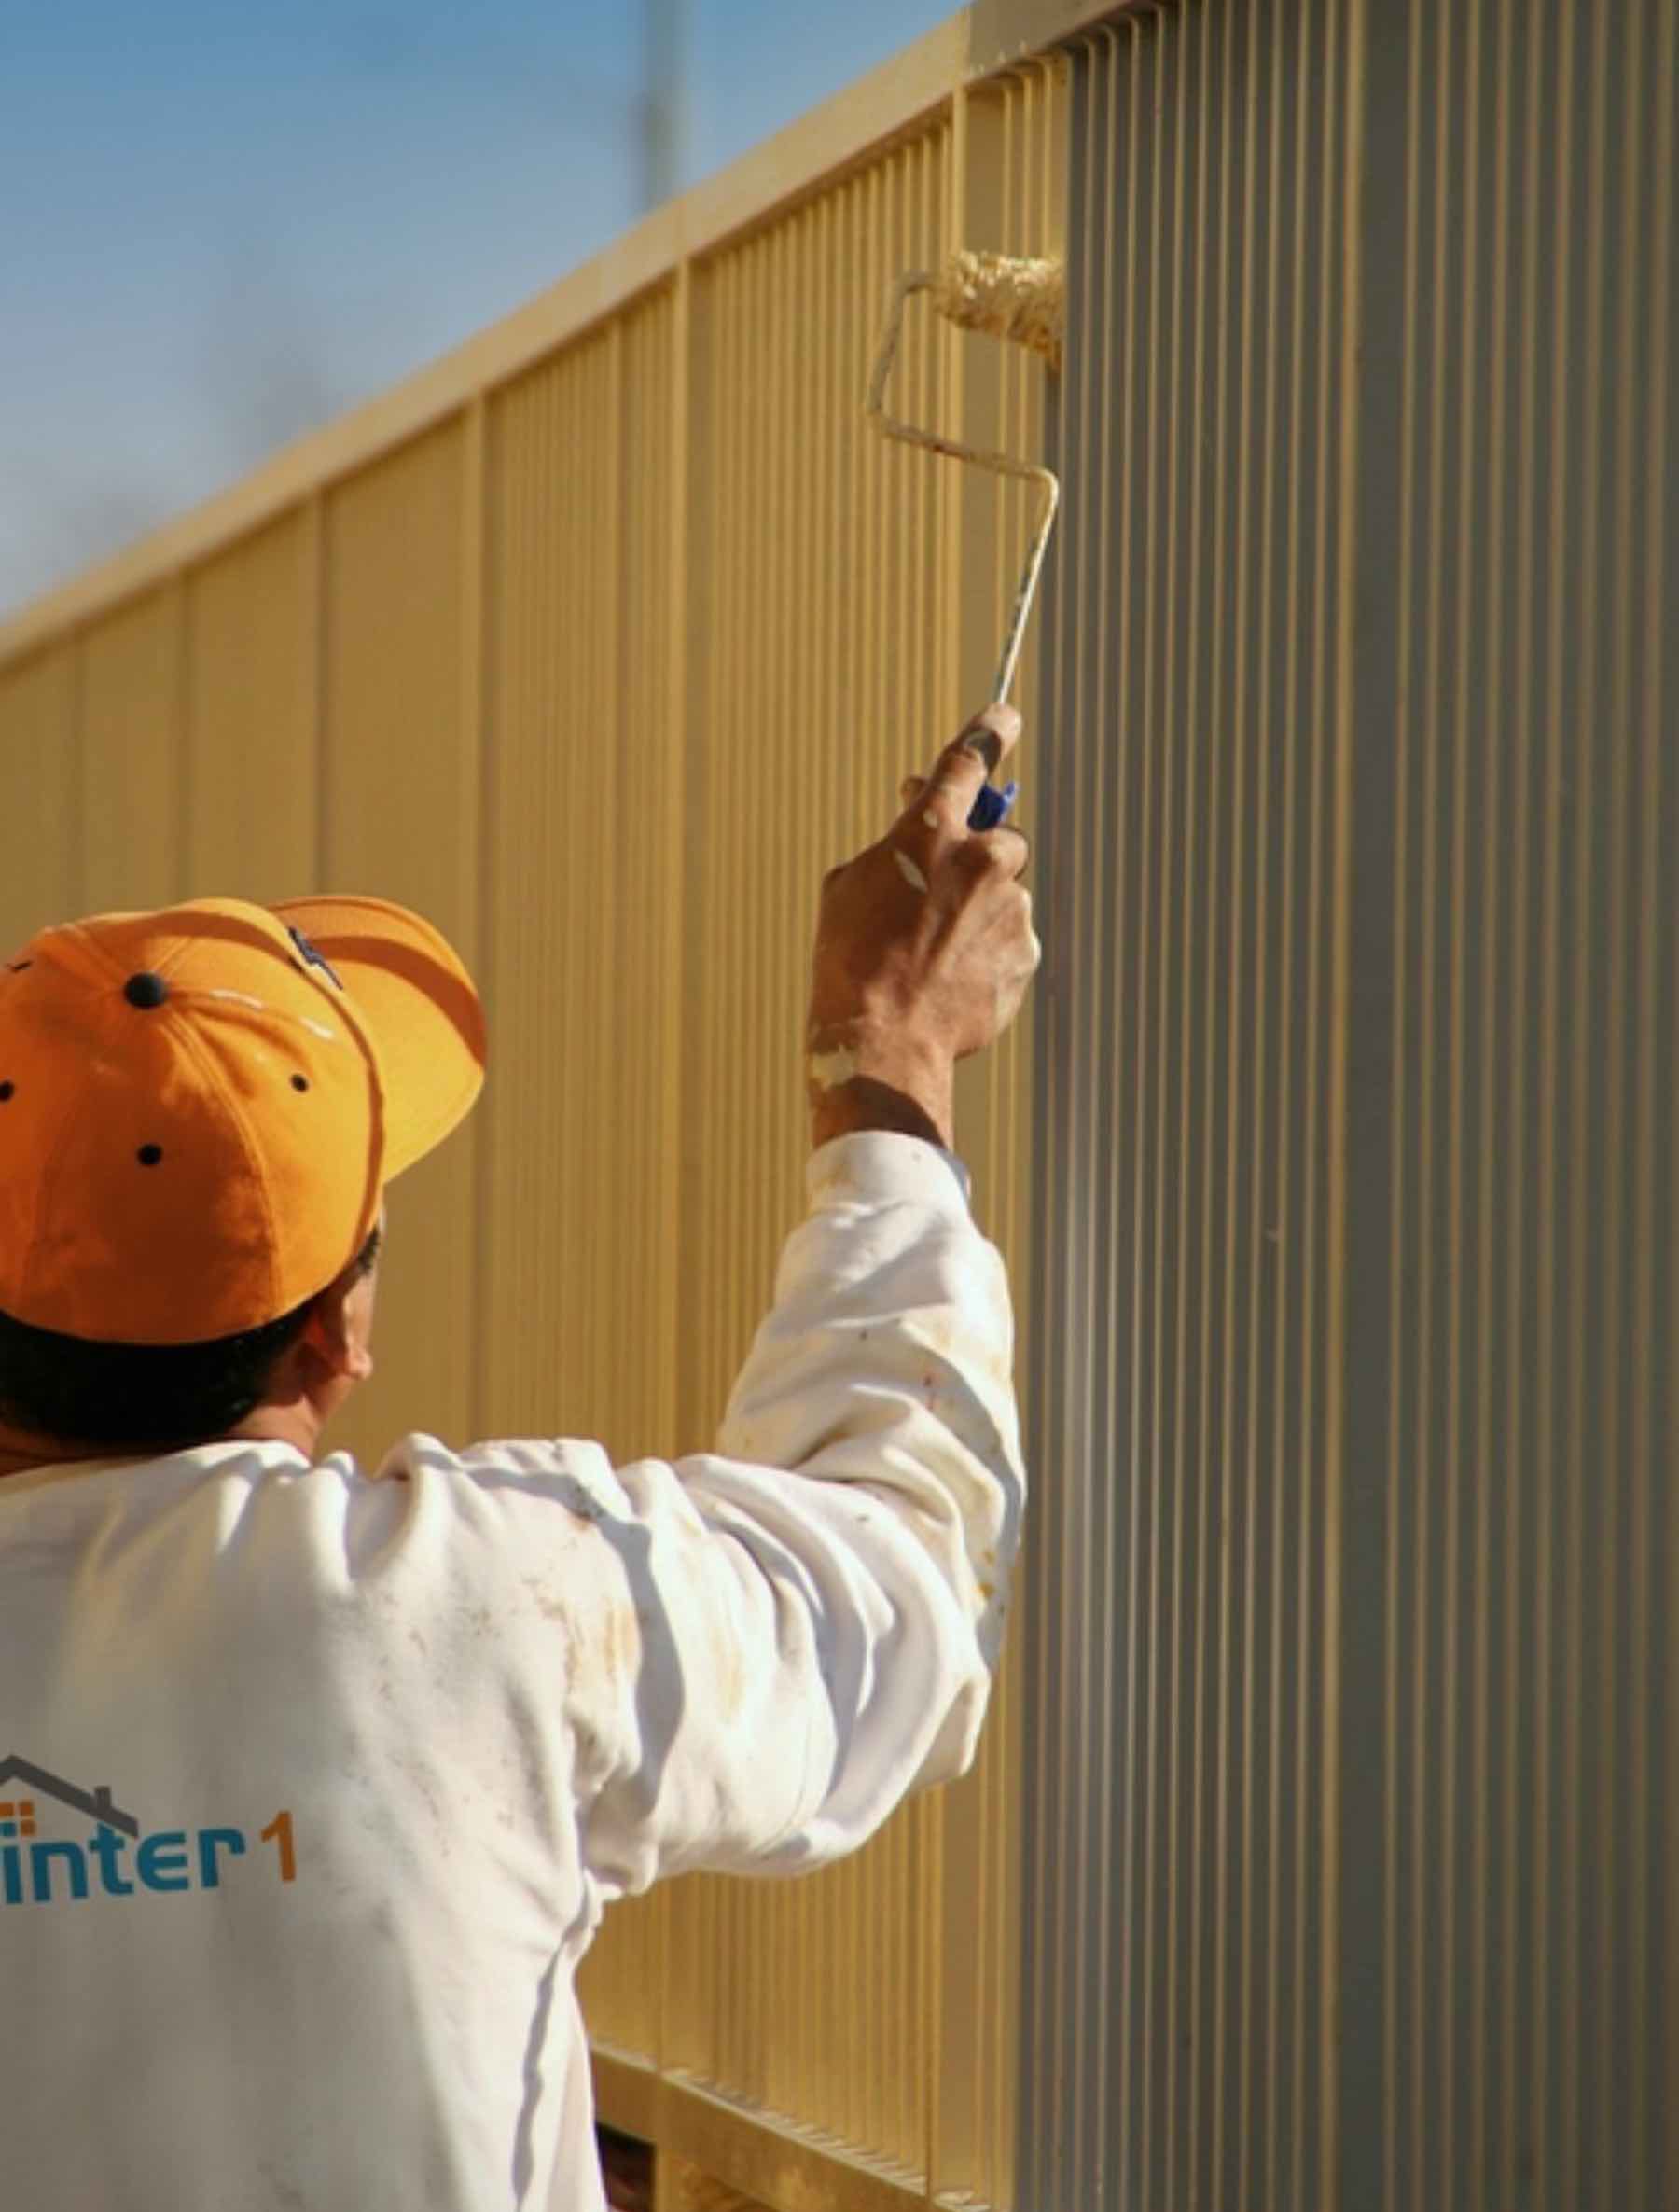 Painter1 of Fayetteville has top rated industrial painters in Fayetteville.